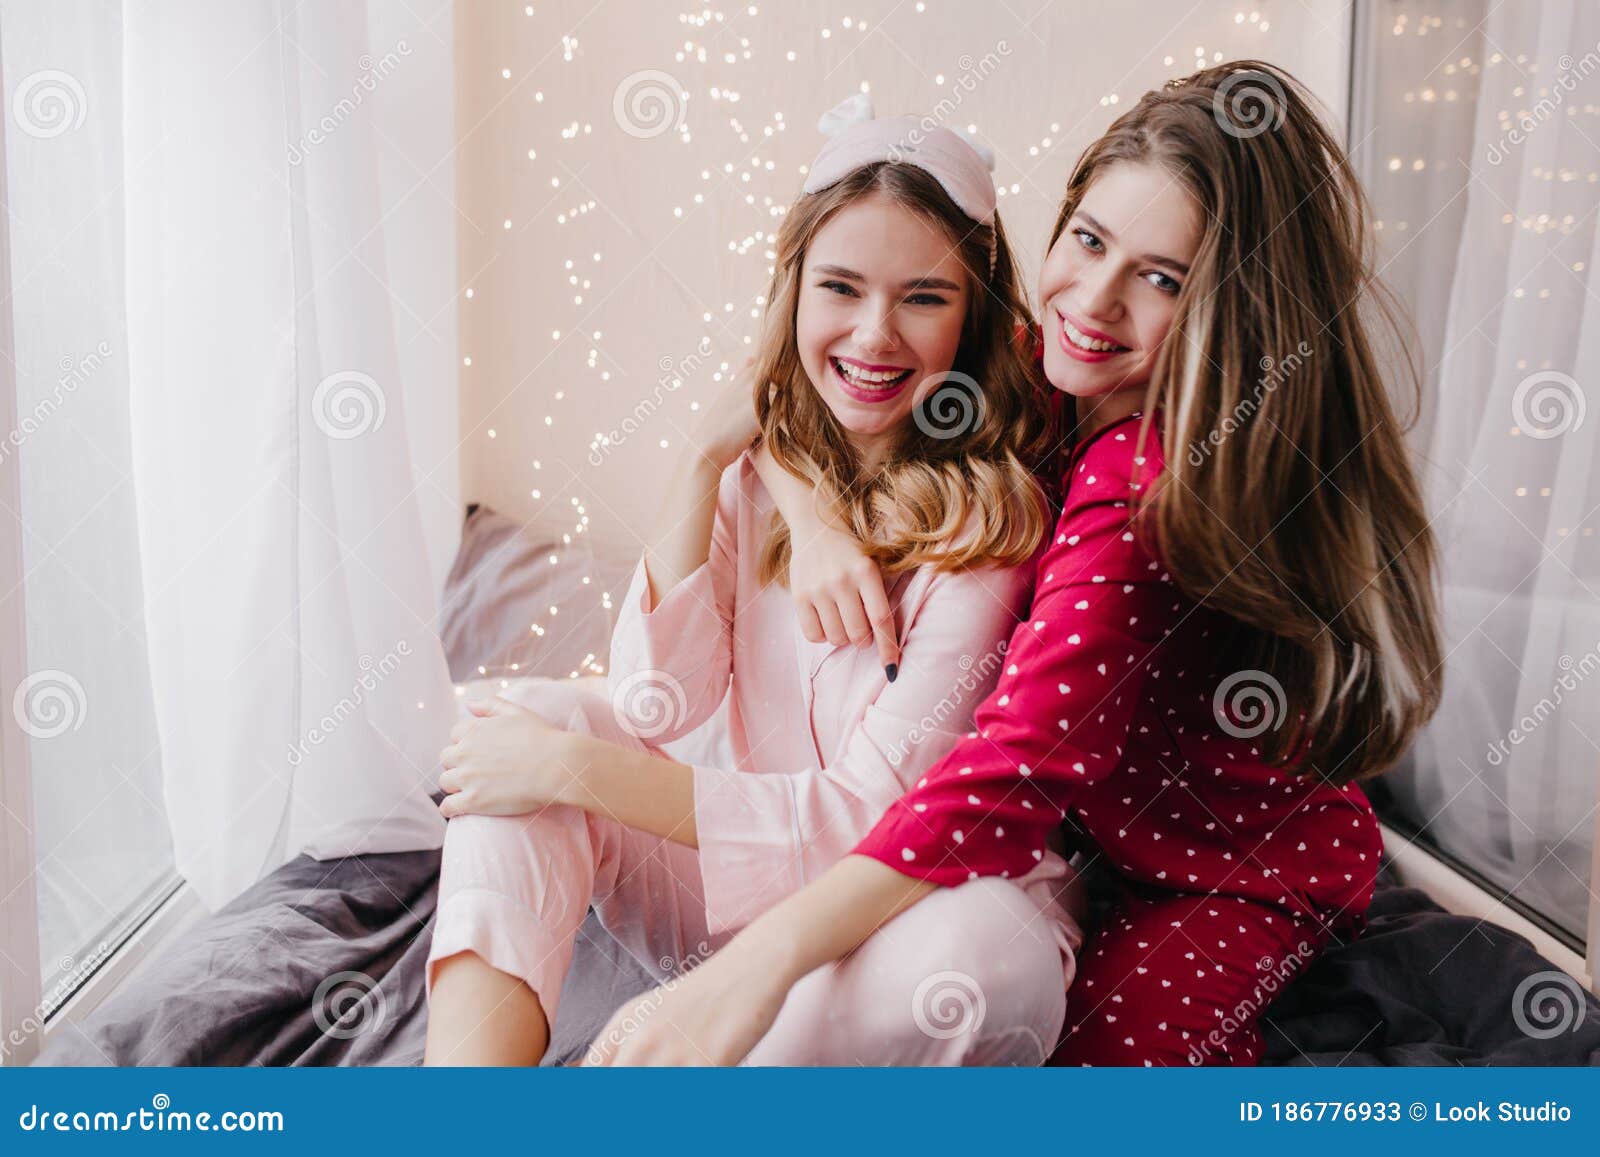 Winsome Dark-haired Girls Hugs with Best Friend in Morning. Adorable ...